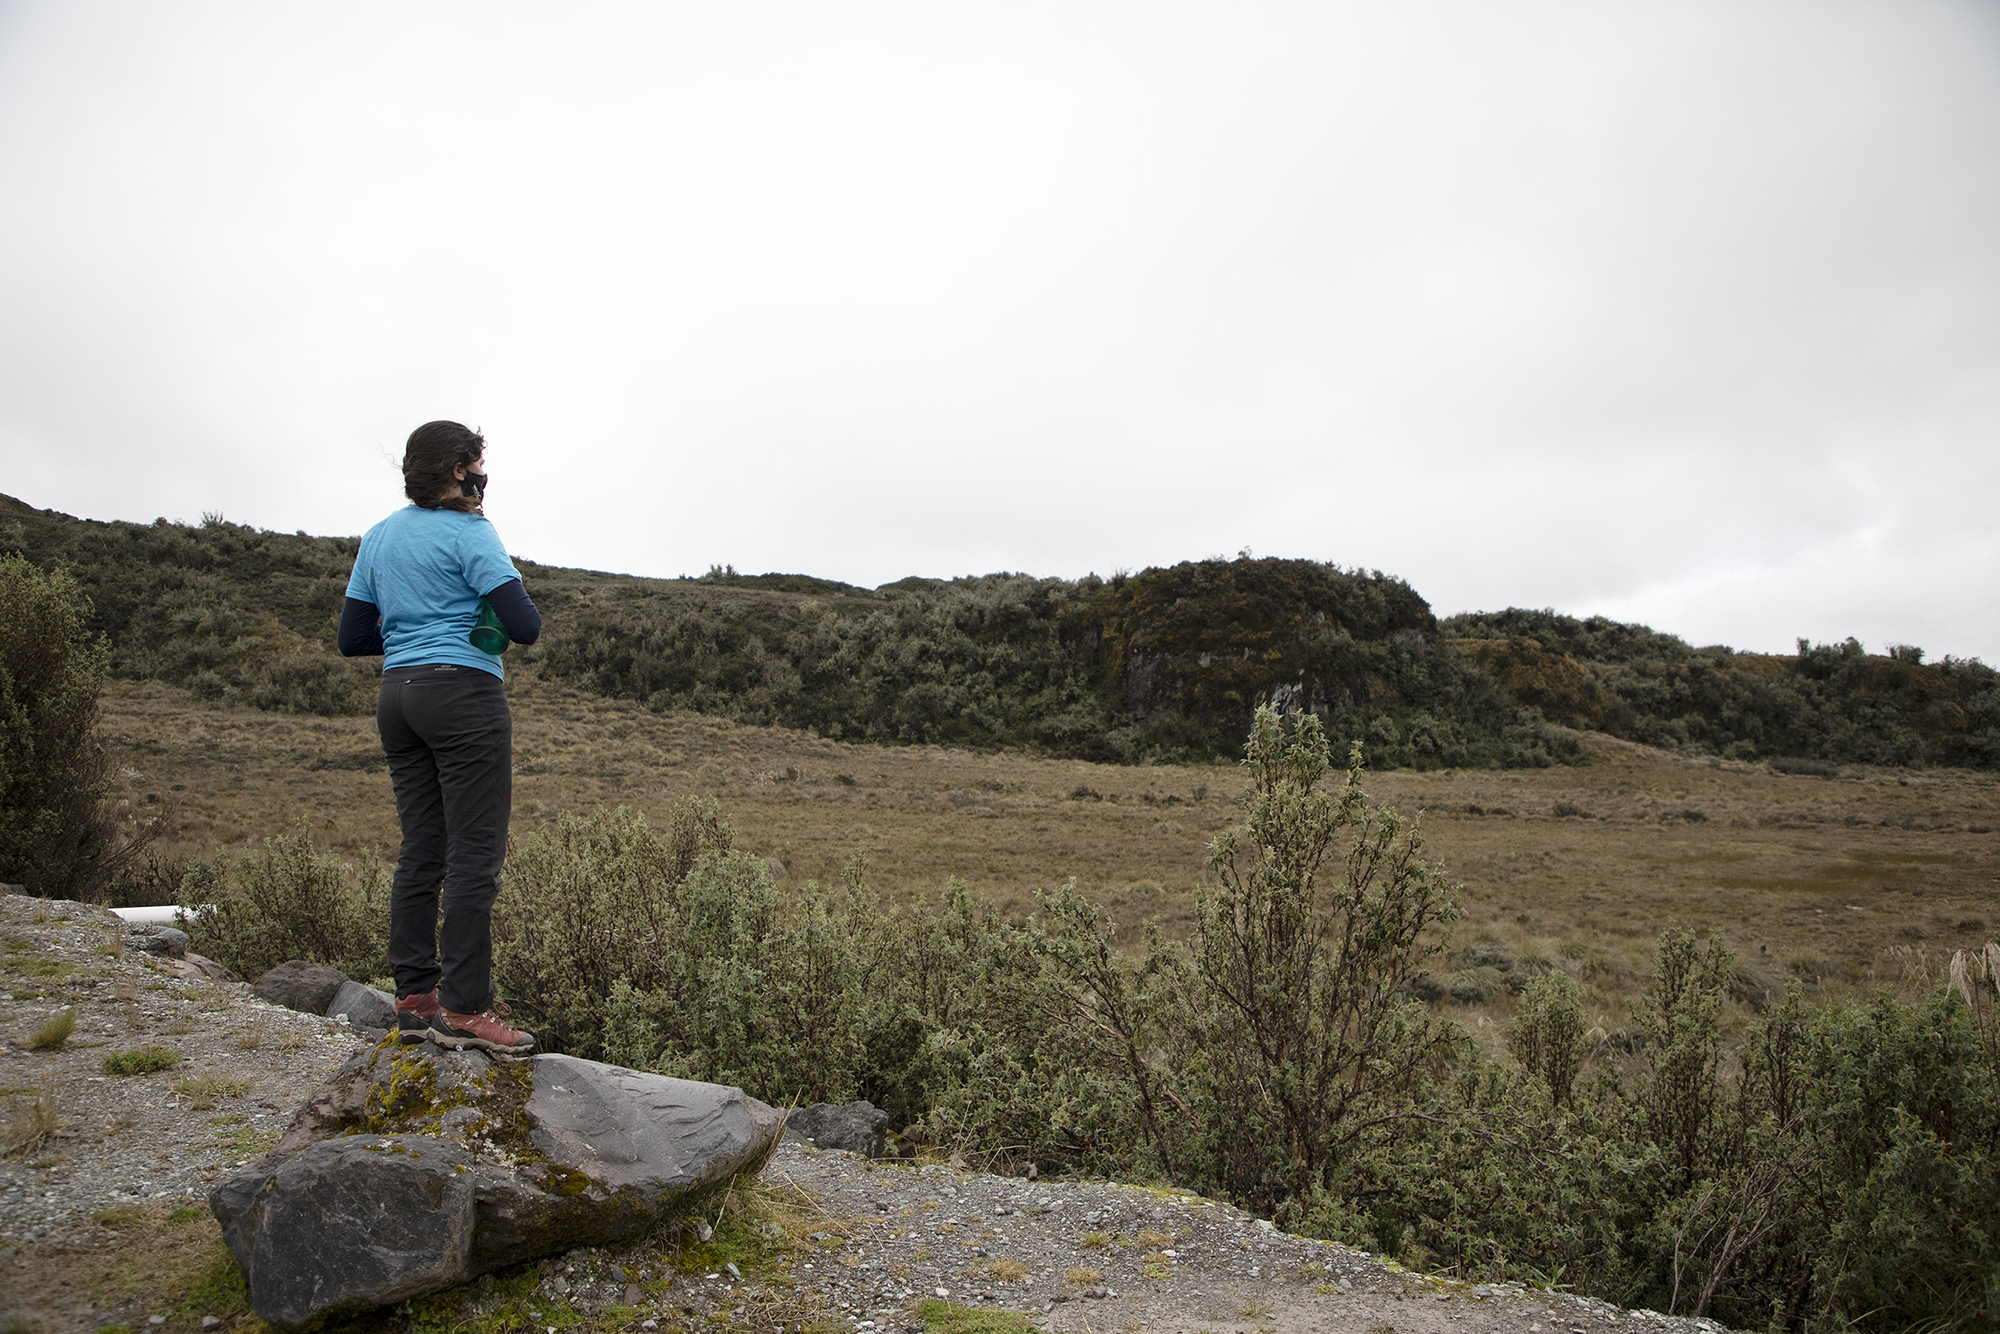 Kriddie Whitmore looks out at the paramo